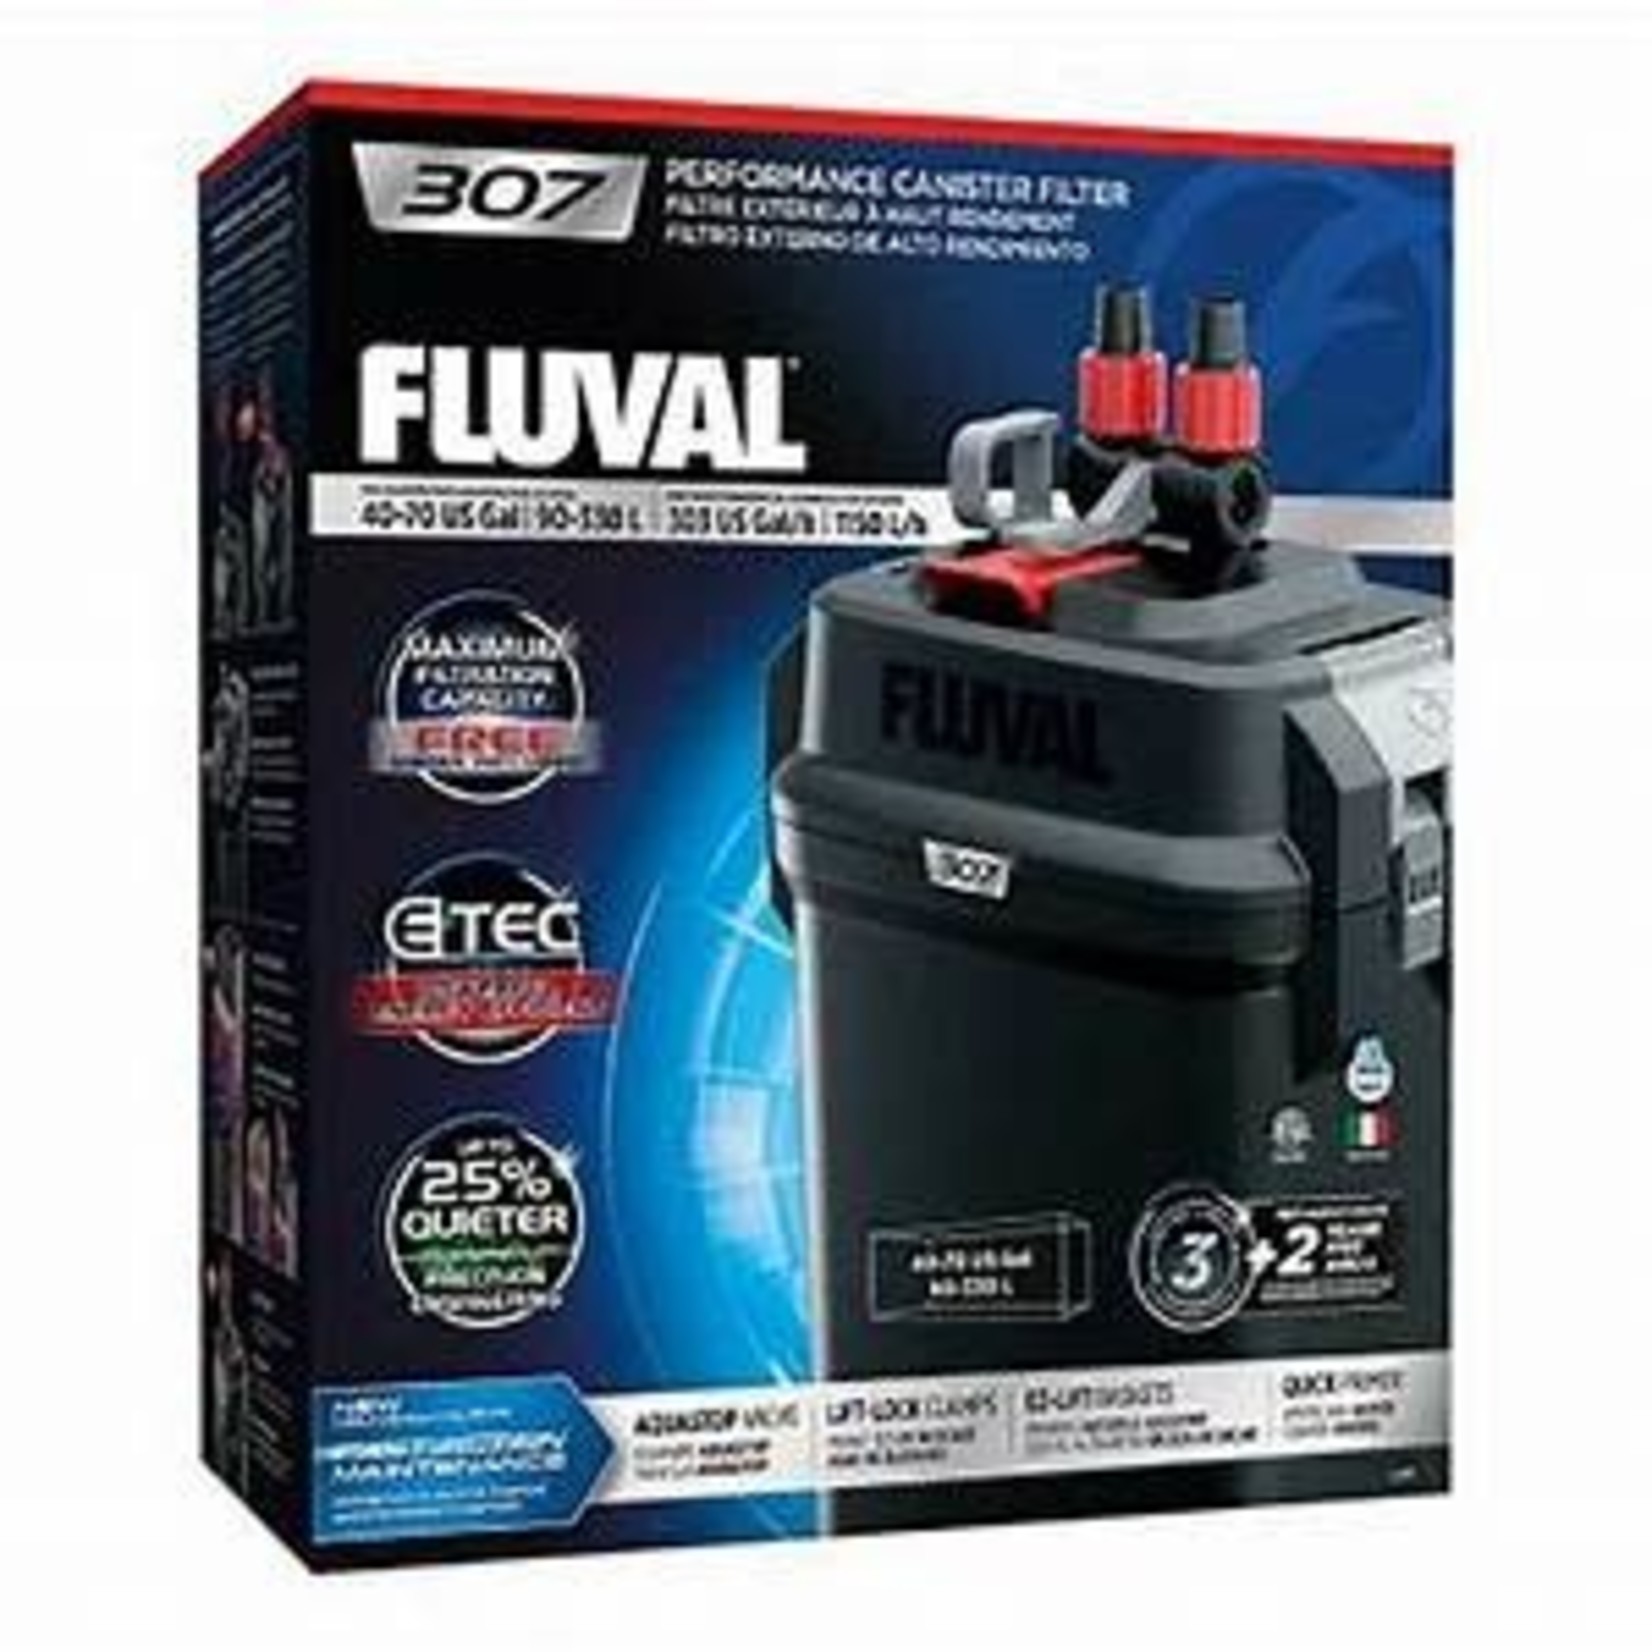 Fluval 307 Performance Canister Filter, up to 330 L (70 US gal)